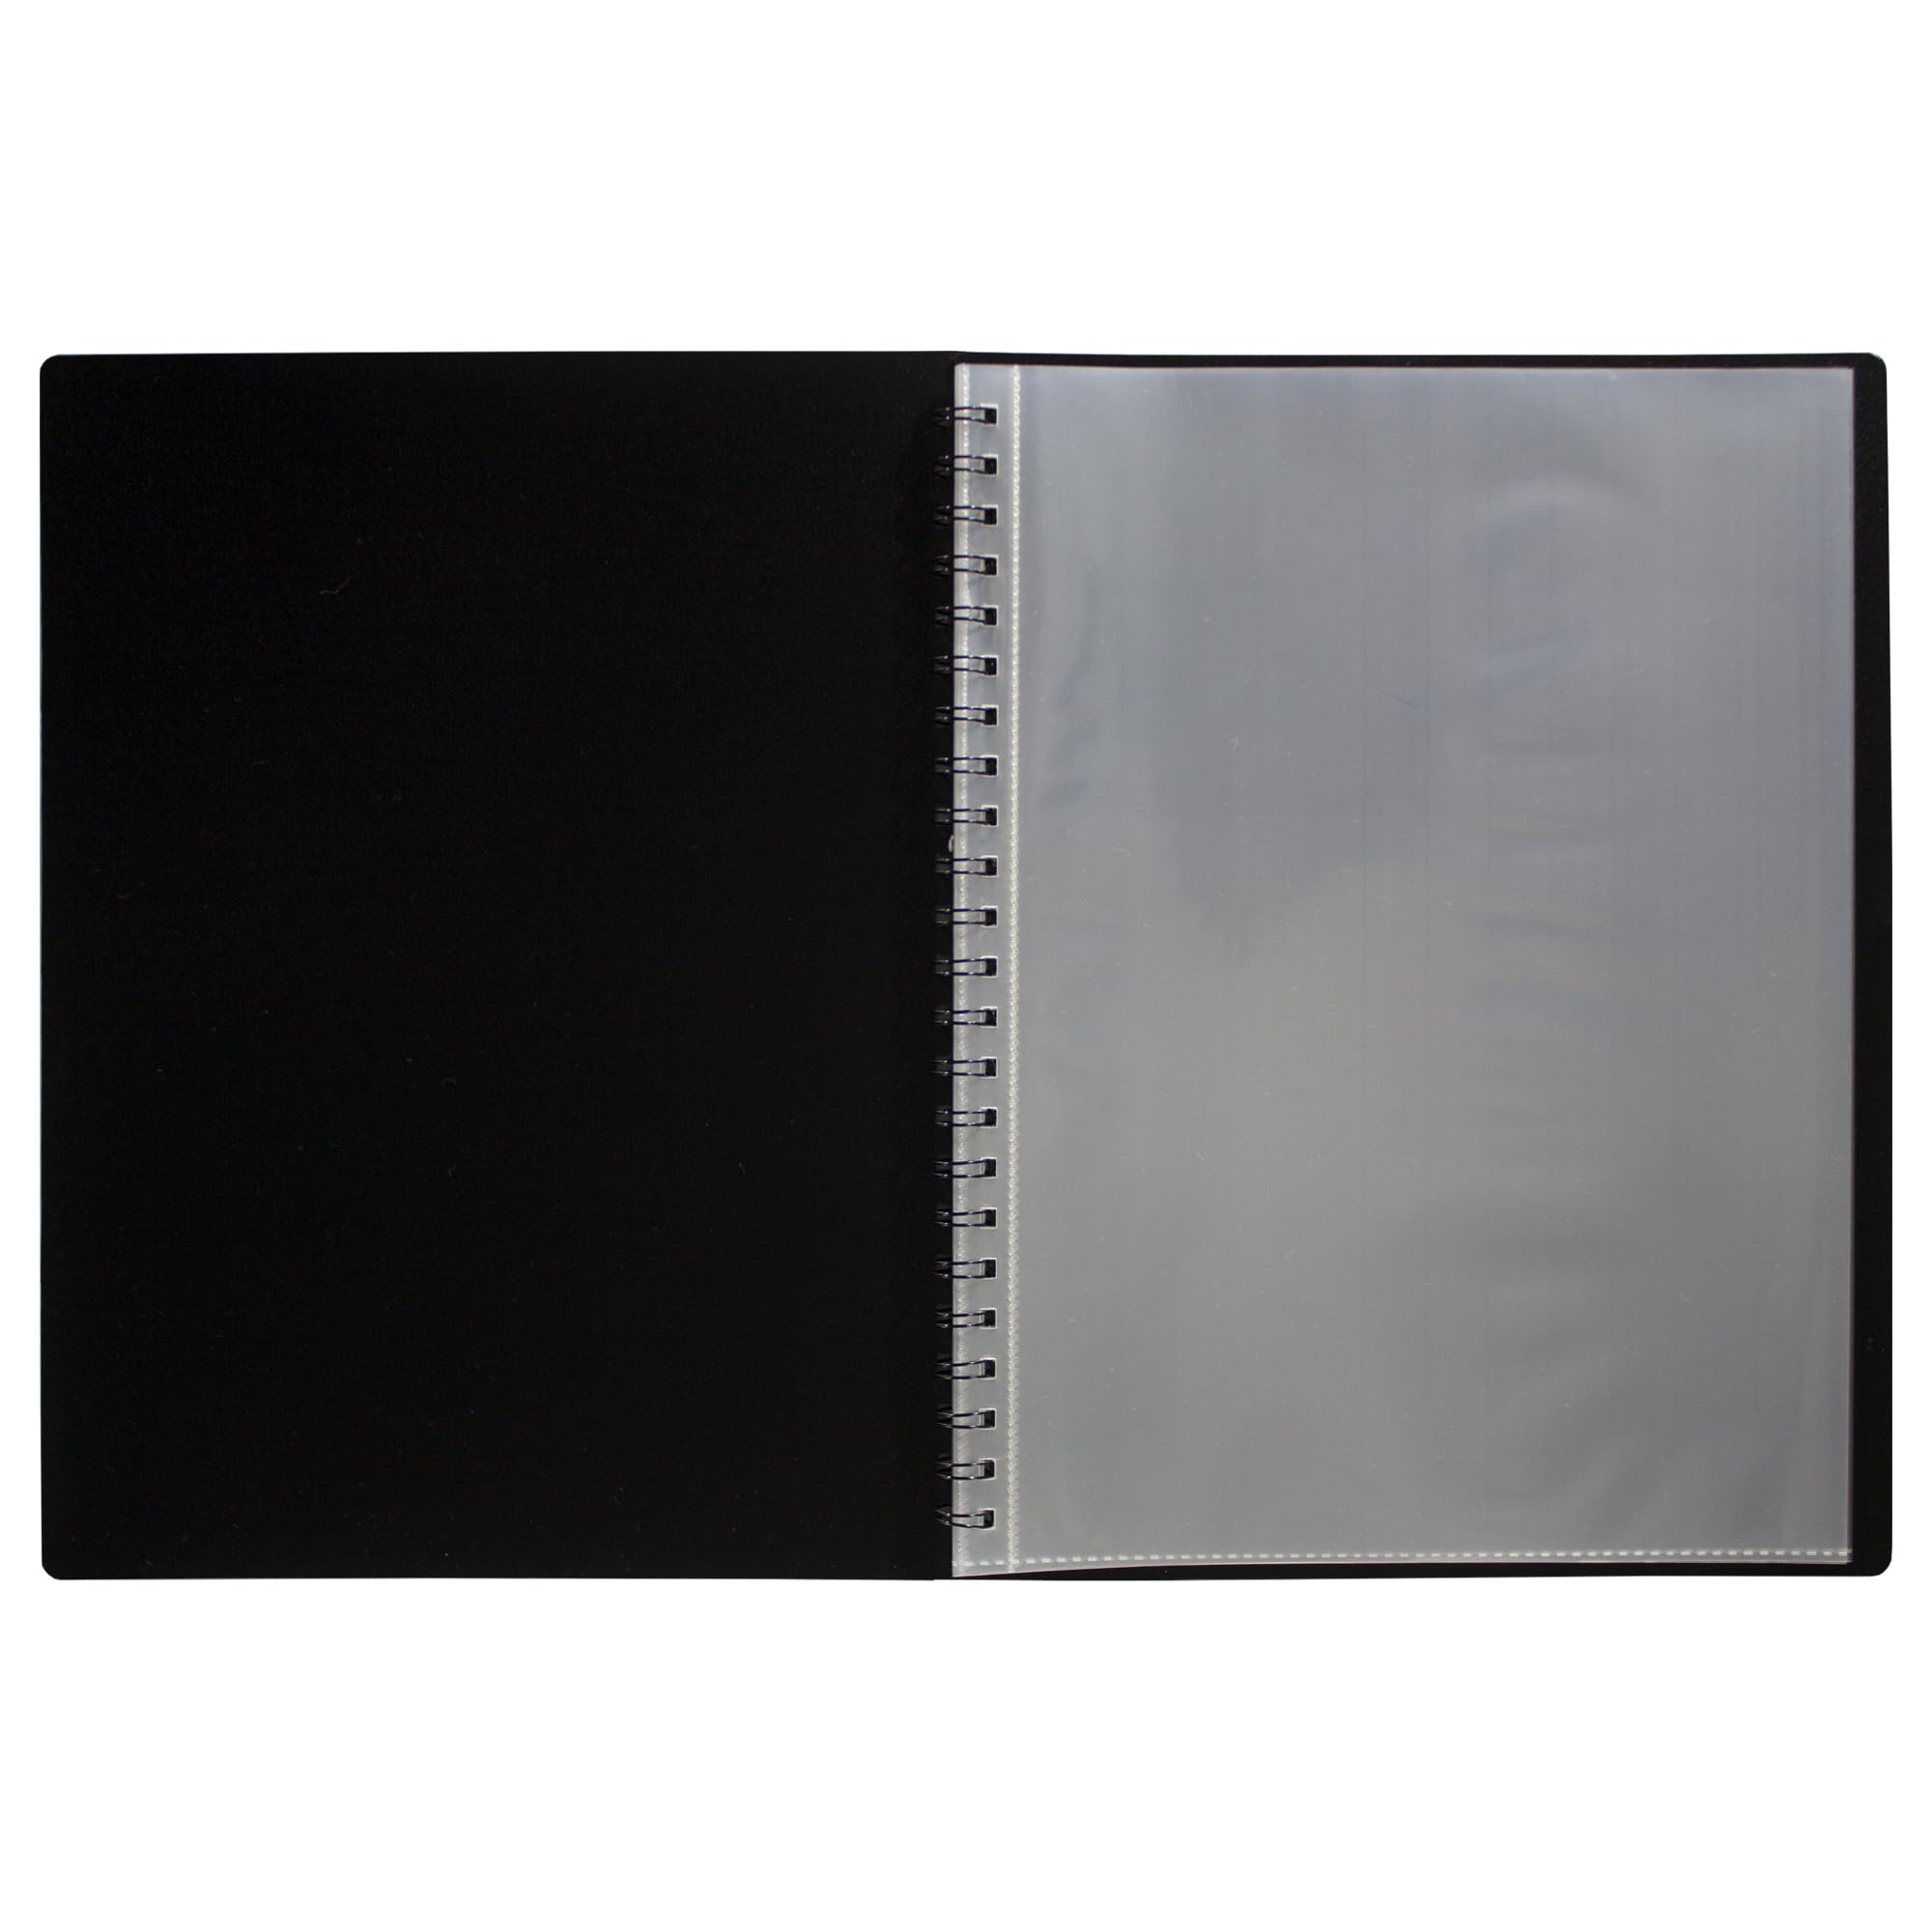 eco-eco A5 50% Recycled 40 Pocket Fold Flat Spiral Bound Display Book, eco137